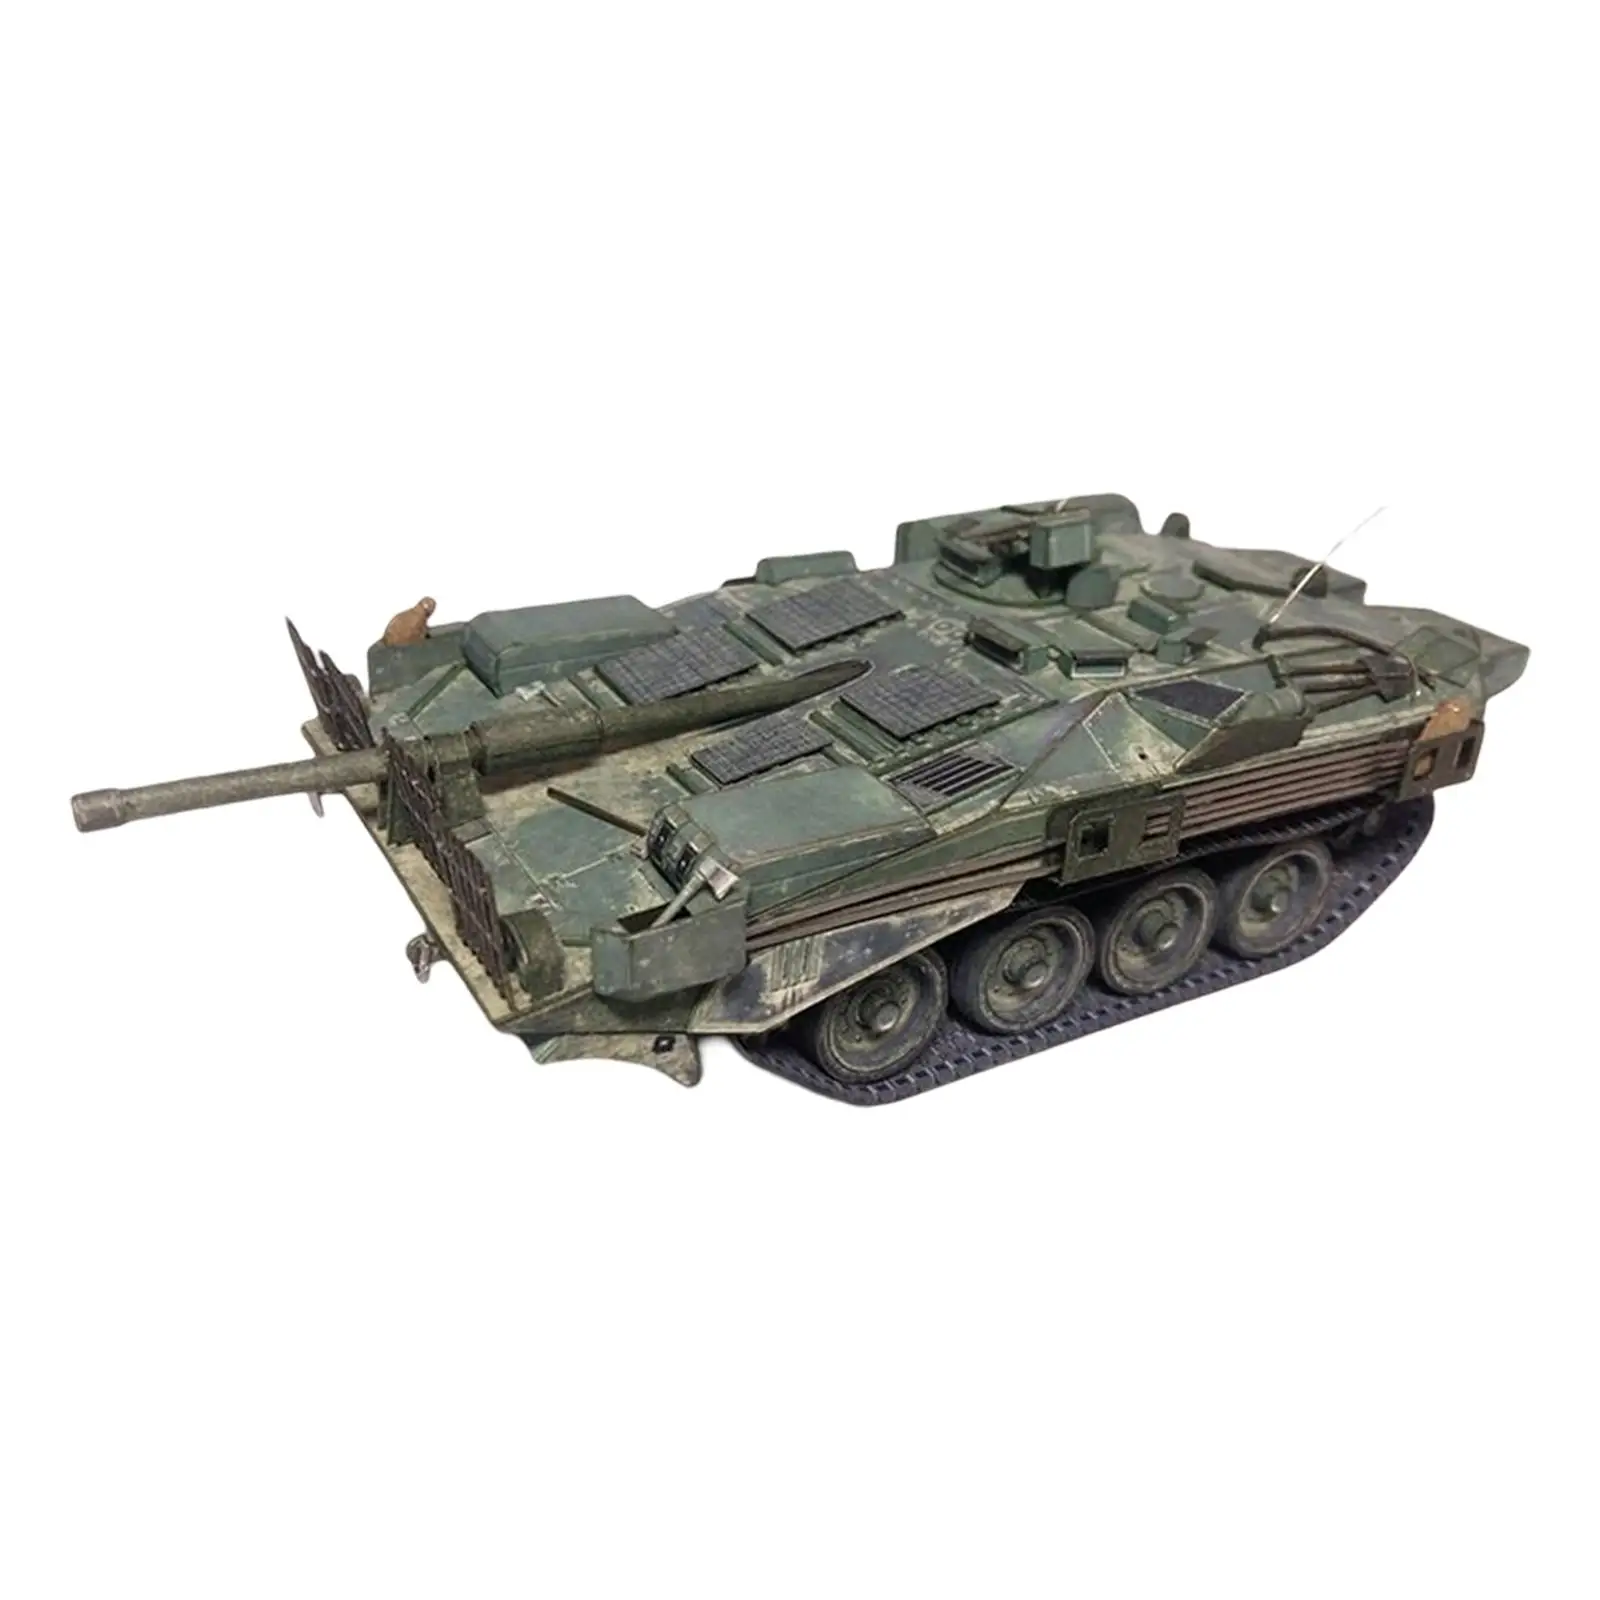 

1/35 Tank Model Ornament Tabletop Decor DIY Assemble Toy for Birthday Gifts